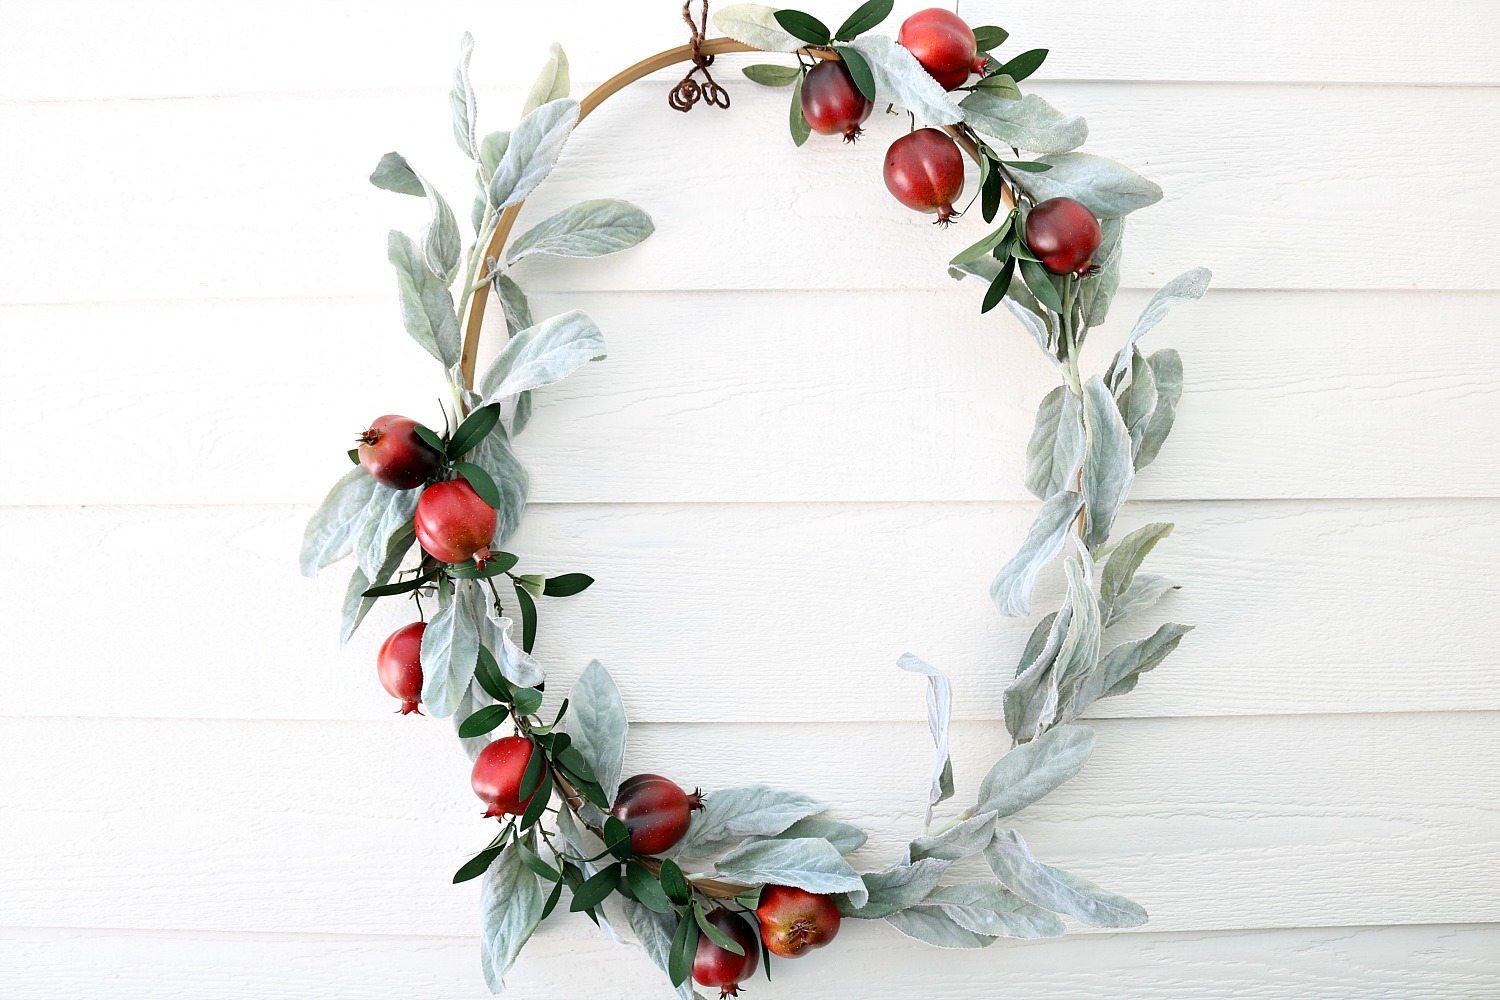 Fall ready with this quilt hoop wreath filled with lambs ear and pomegranate